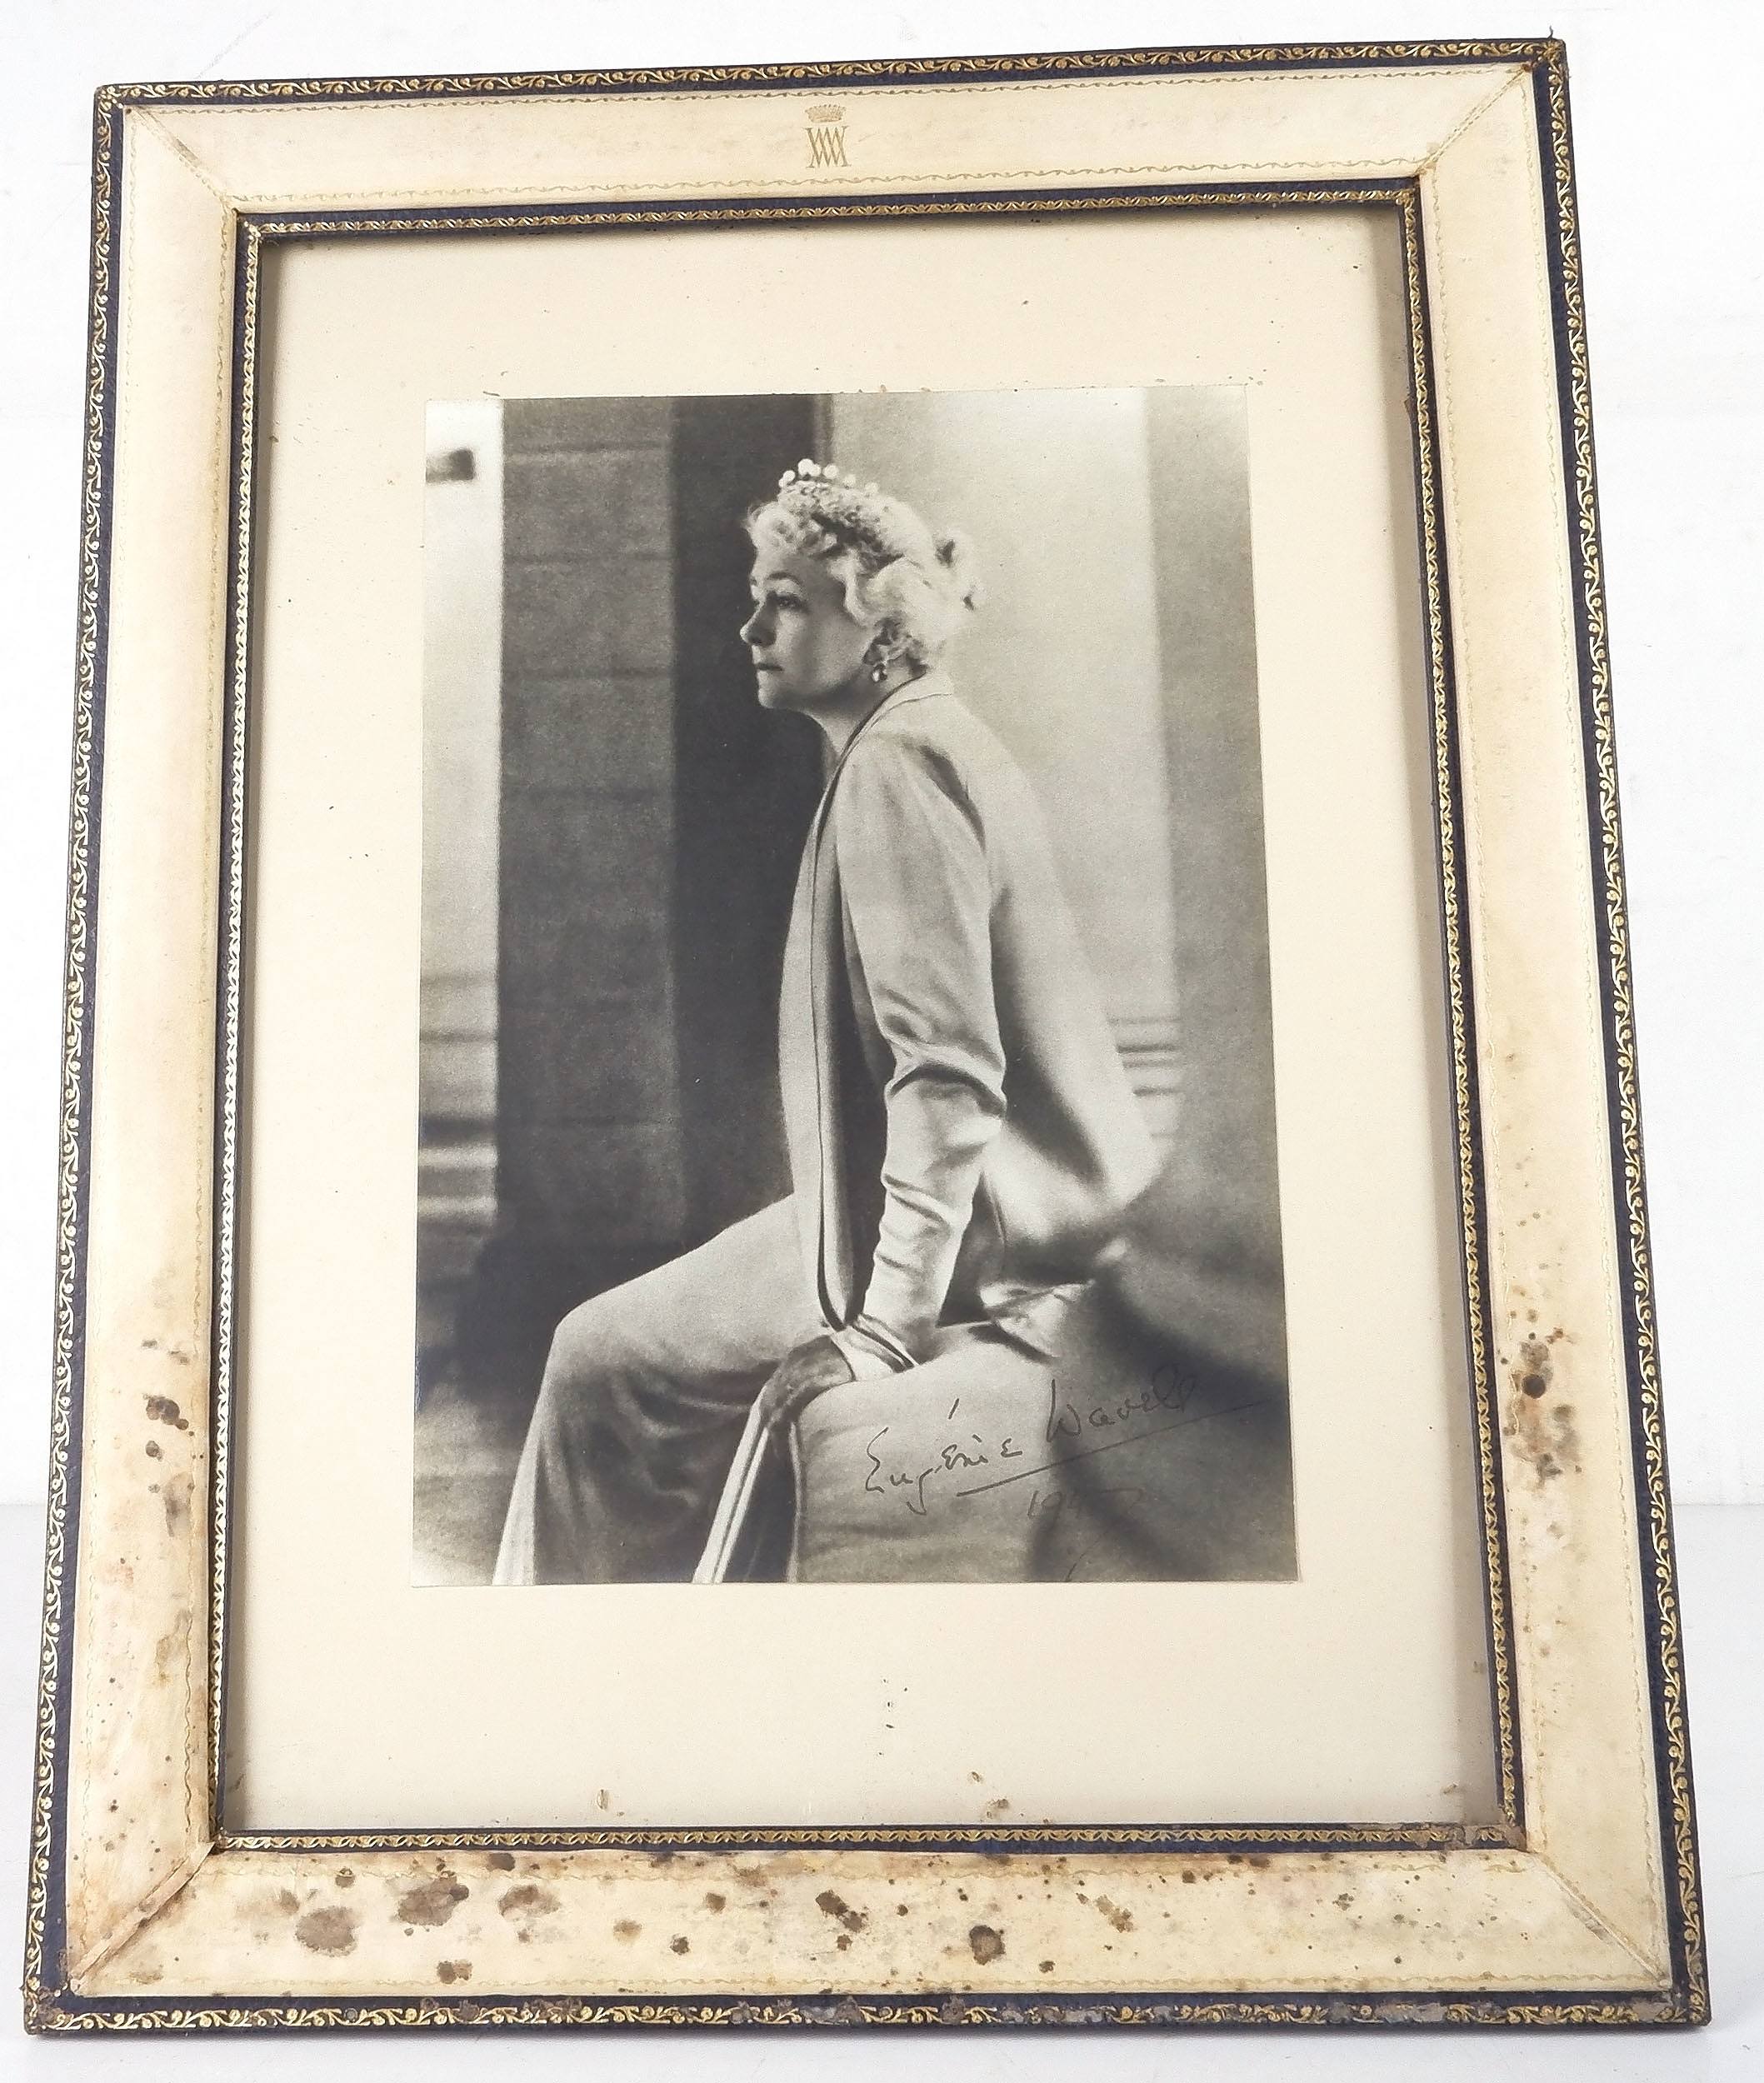 'Signed Portrait of Eugenie Marie Wavell, Countess Wavell by Cecil Beaton'